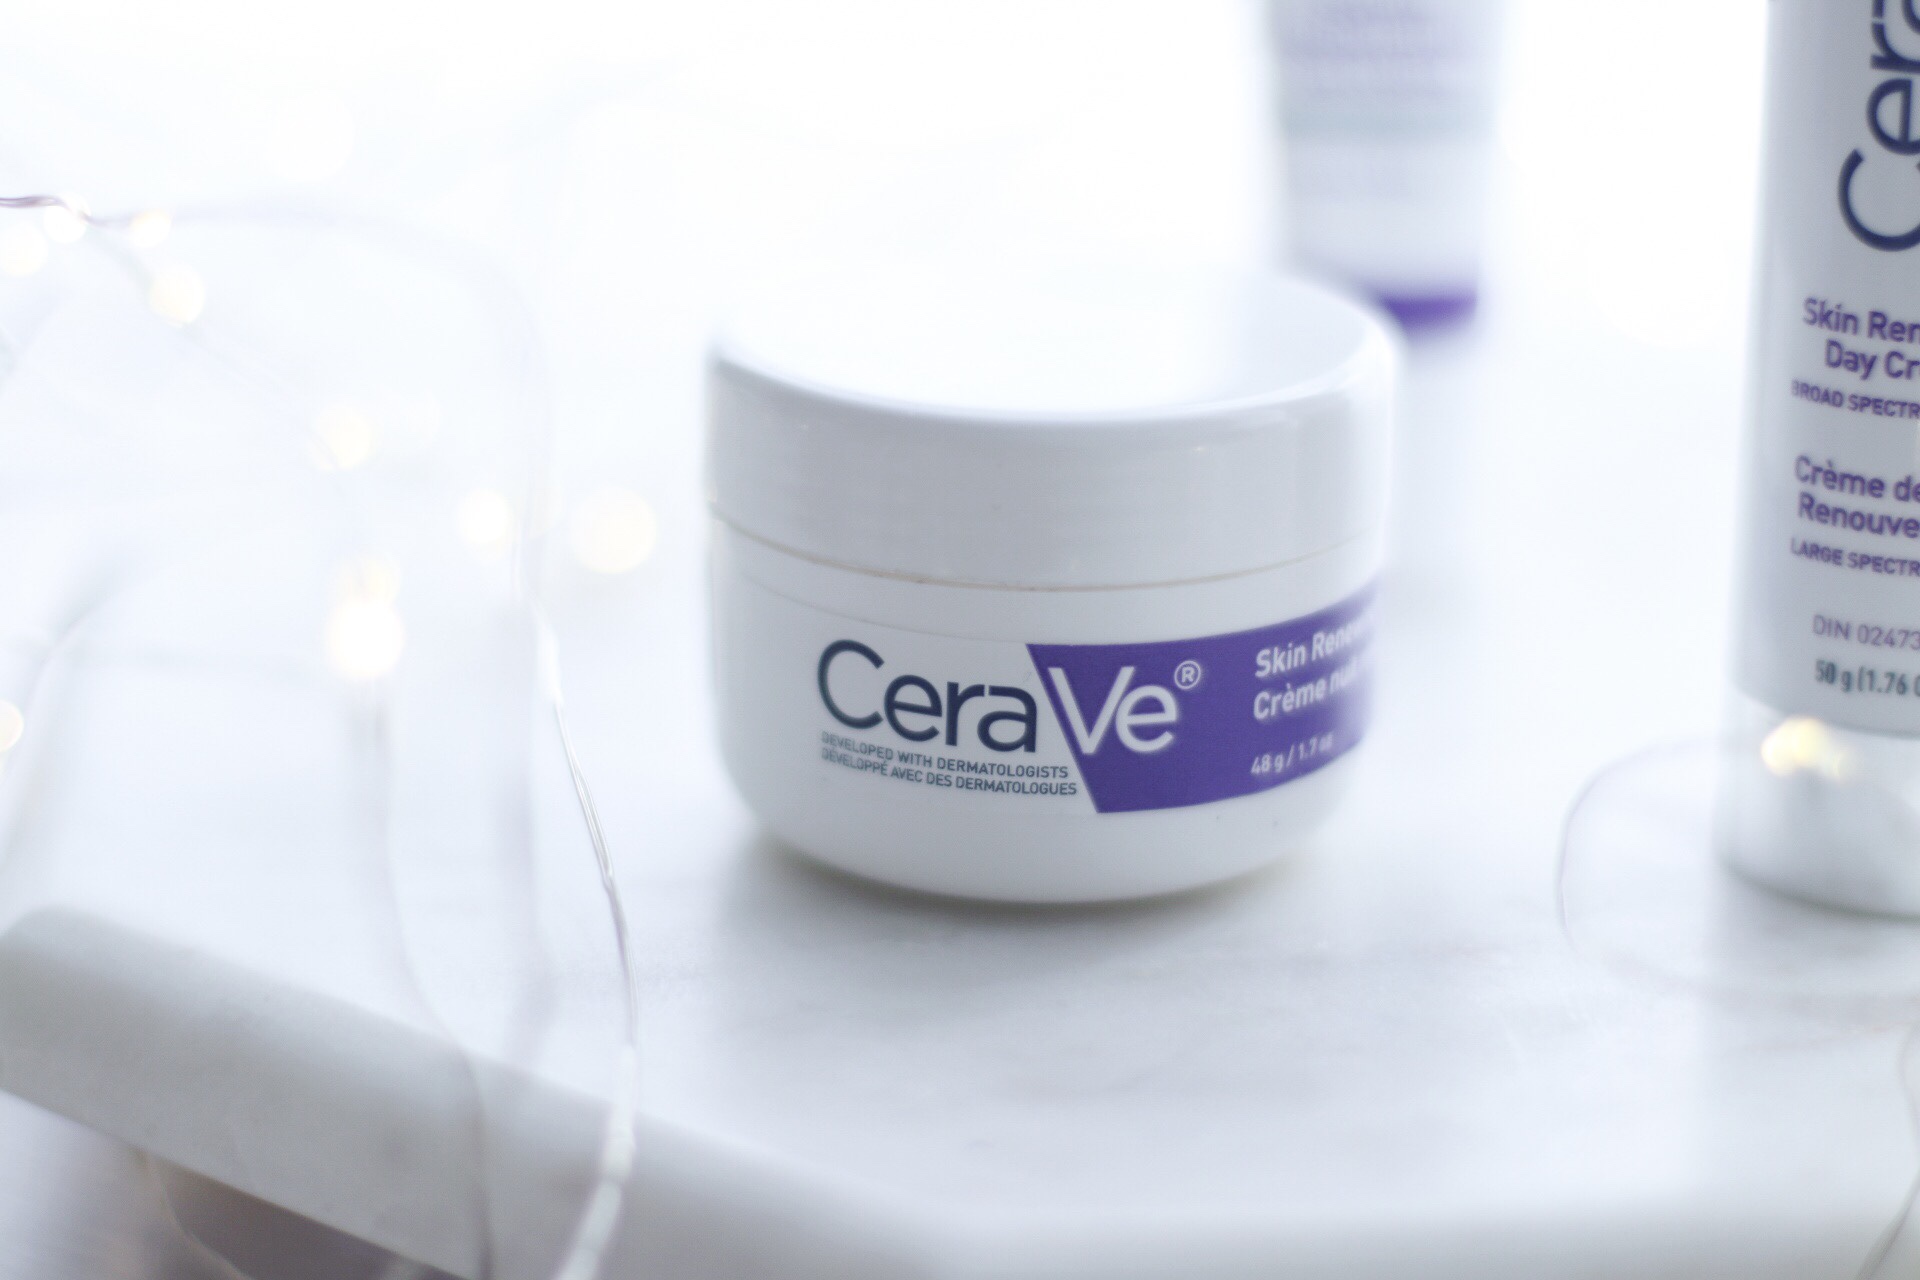 The Best Skin Care For Aging And Dry Skin | CeraVe Renewing Creams